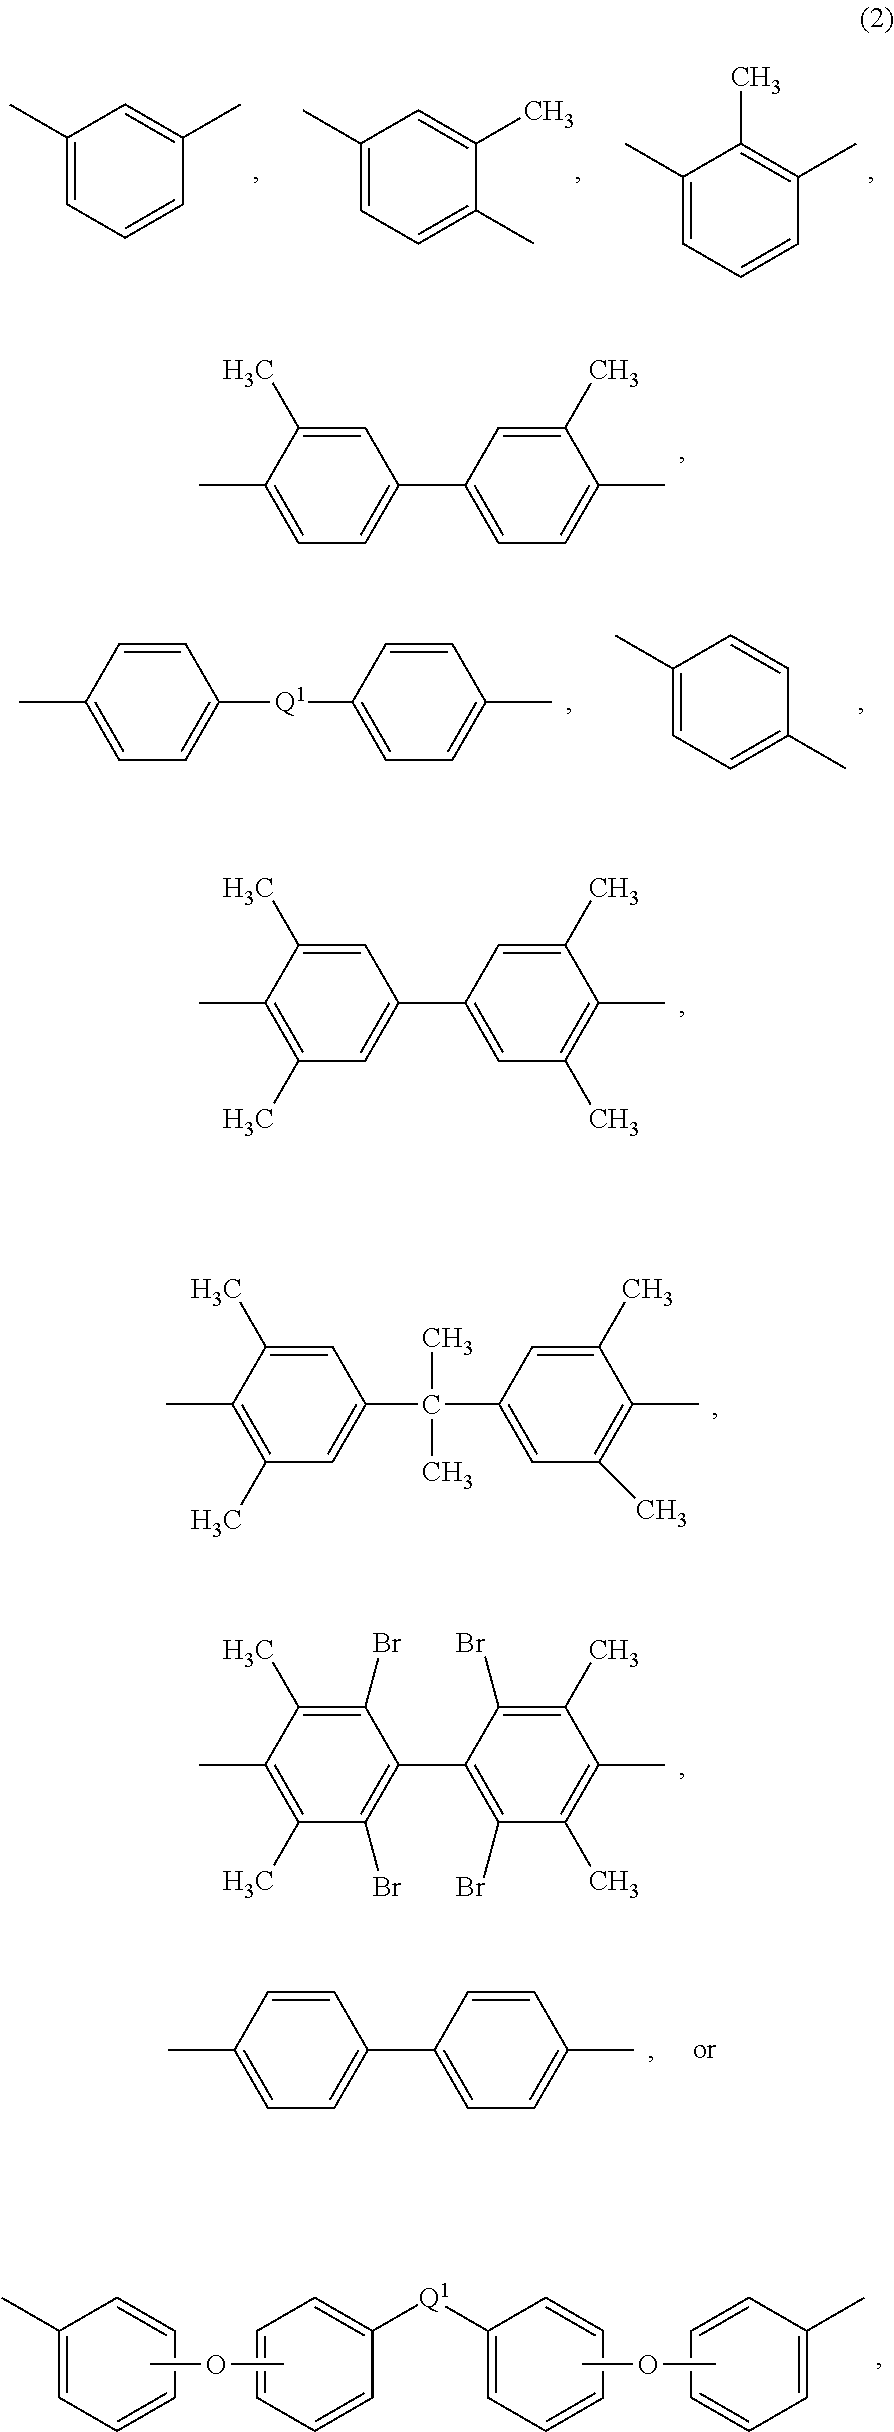 Polyetherimide compositions, methods of manufacture, and articles prepared therefrom